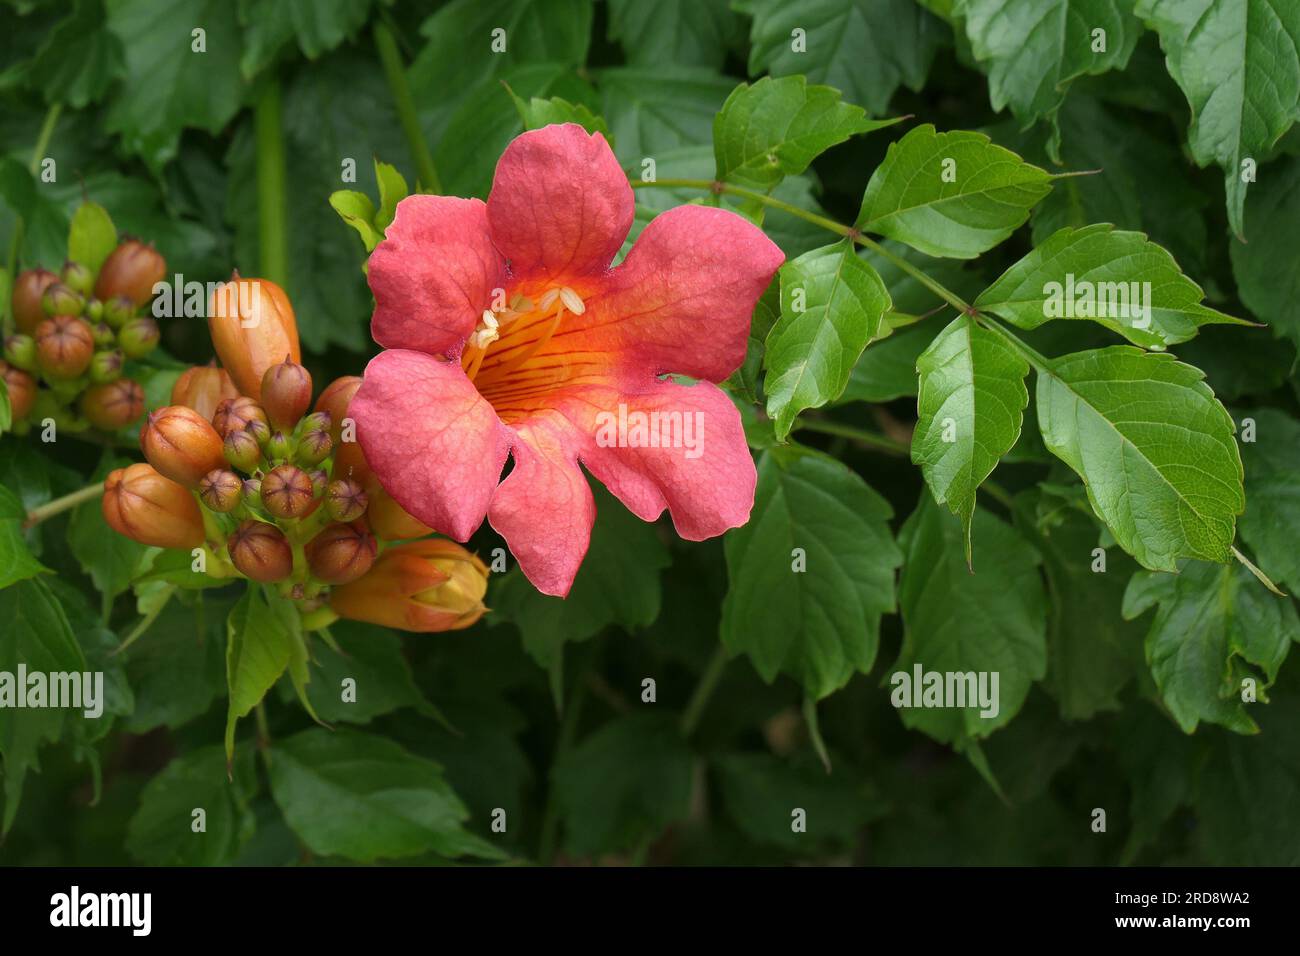 Closeup of the flower and leaves of the garden climbing plant campsis x tagliabuana madame galen. Stock Photo